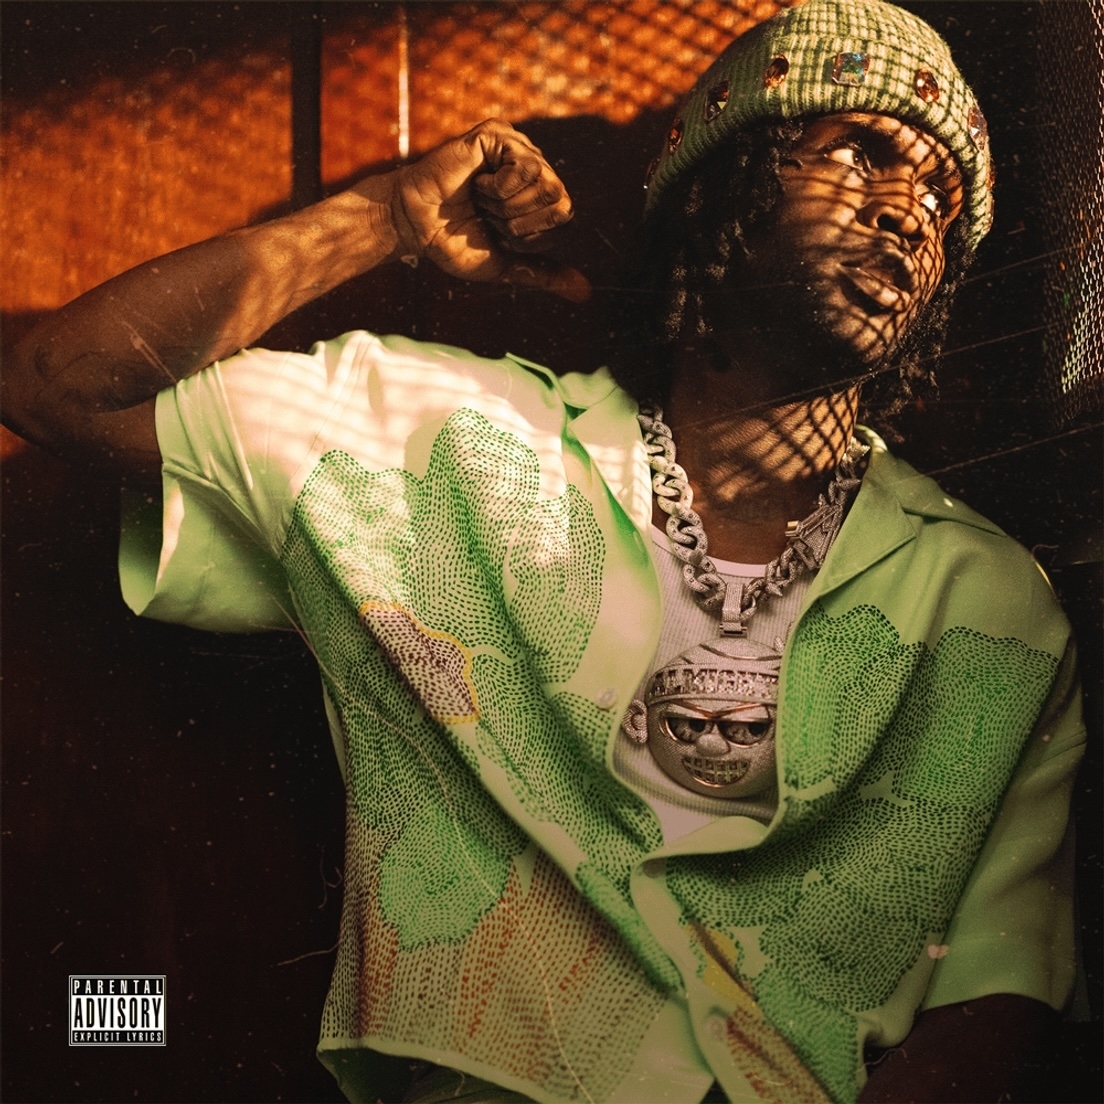 Young Nudy poses in a green shirt, wearing a chunky chain and knitted hat, with a Parental Advisory sticker on the image